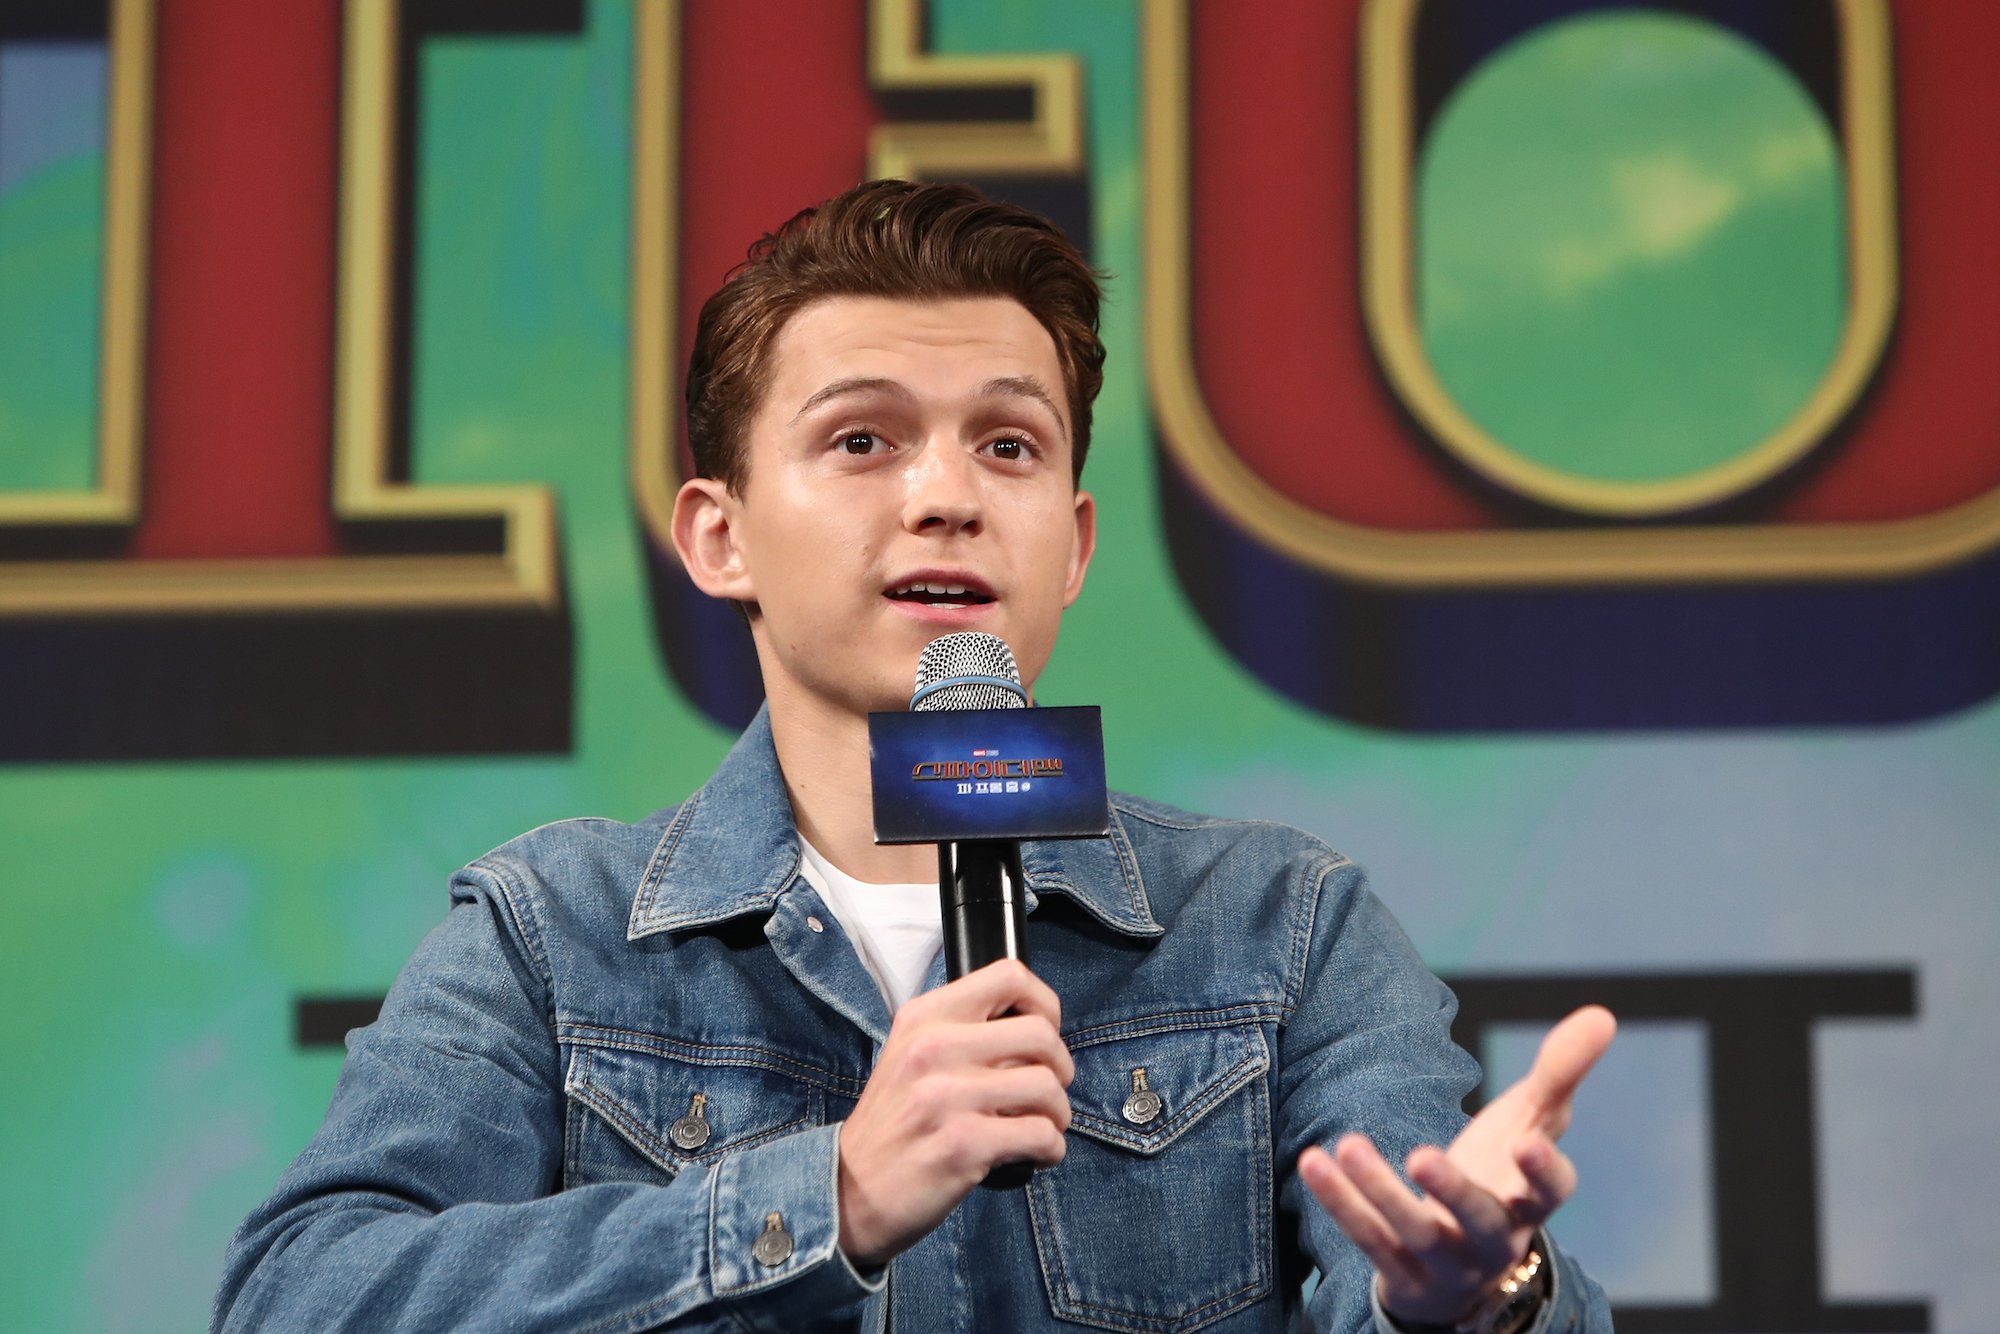 Tom Holland at the press conference for 'Spider-Man: Far From Home' on July 01, 2019